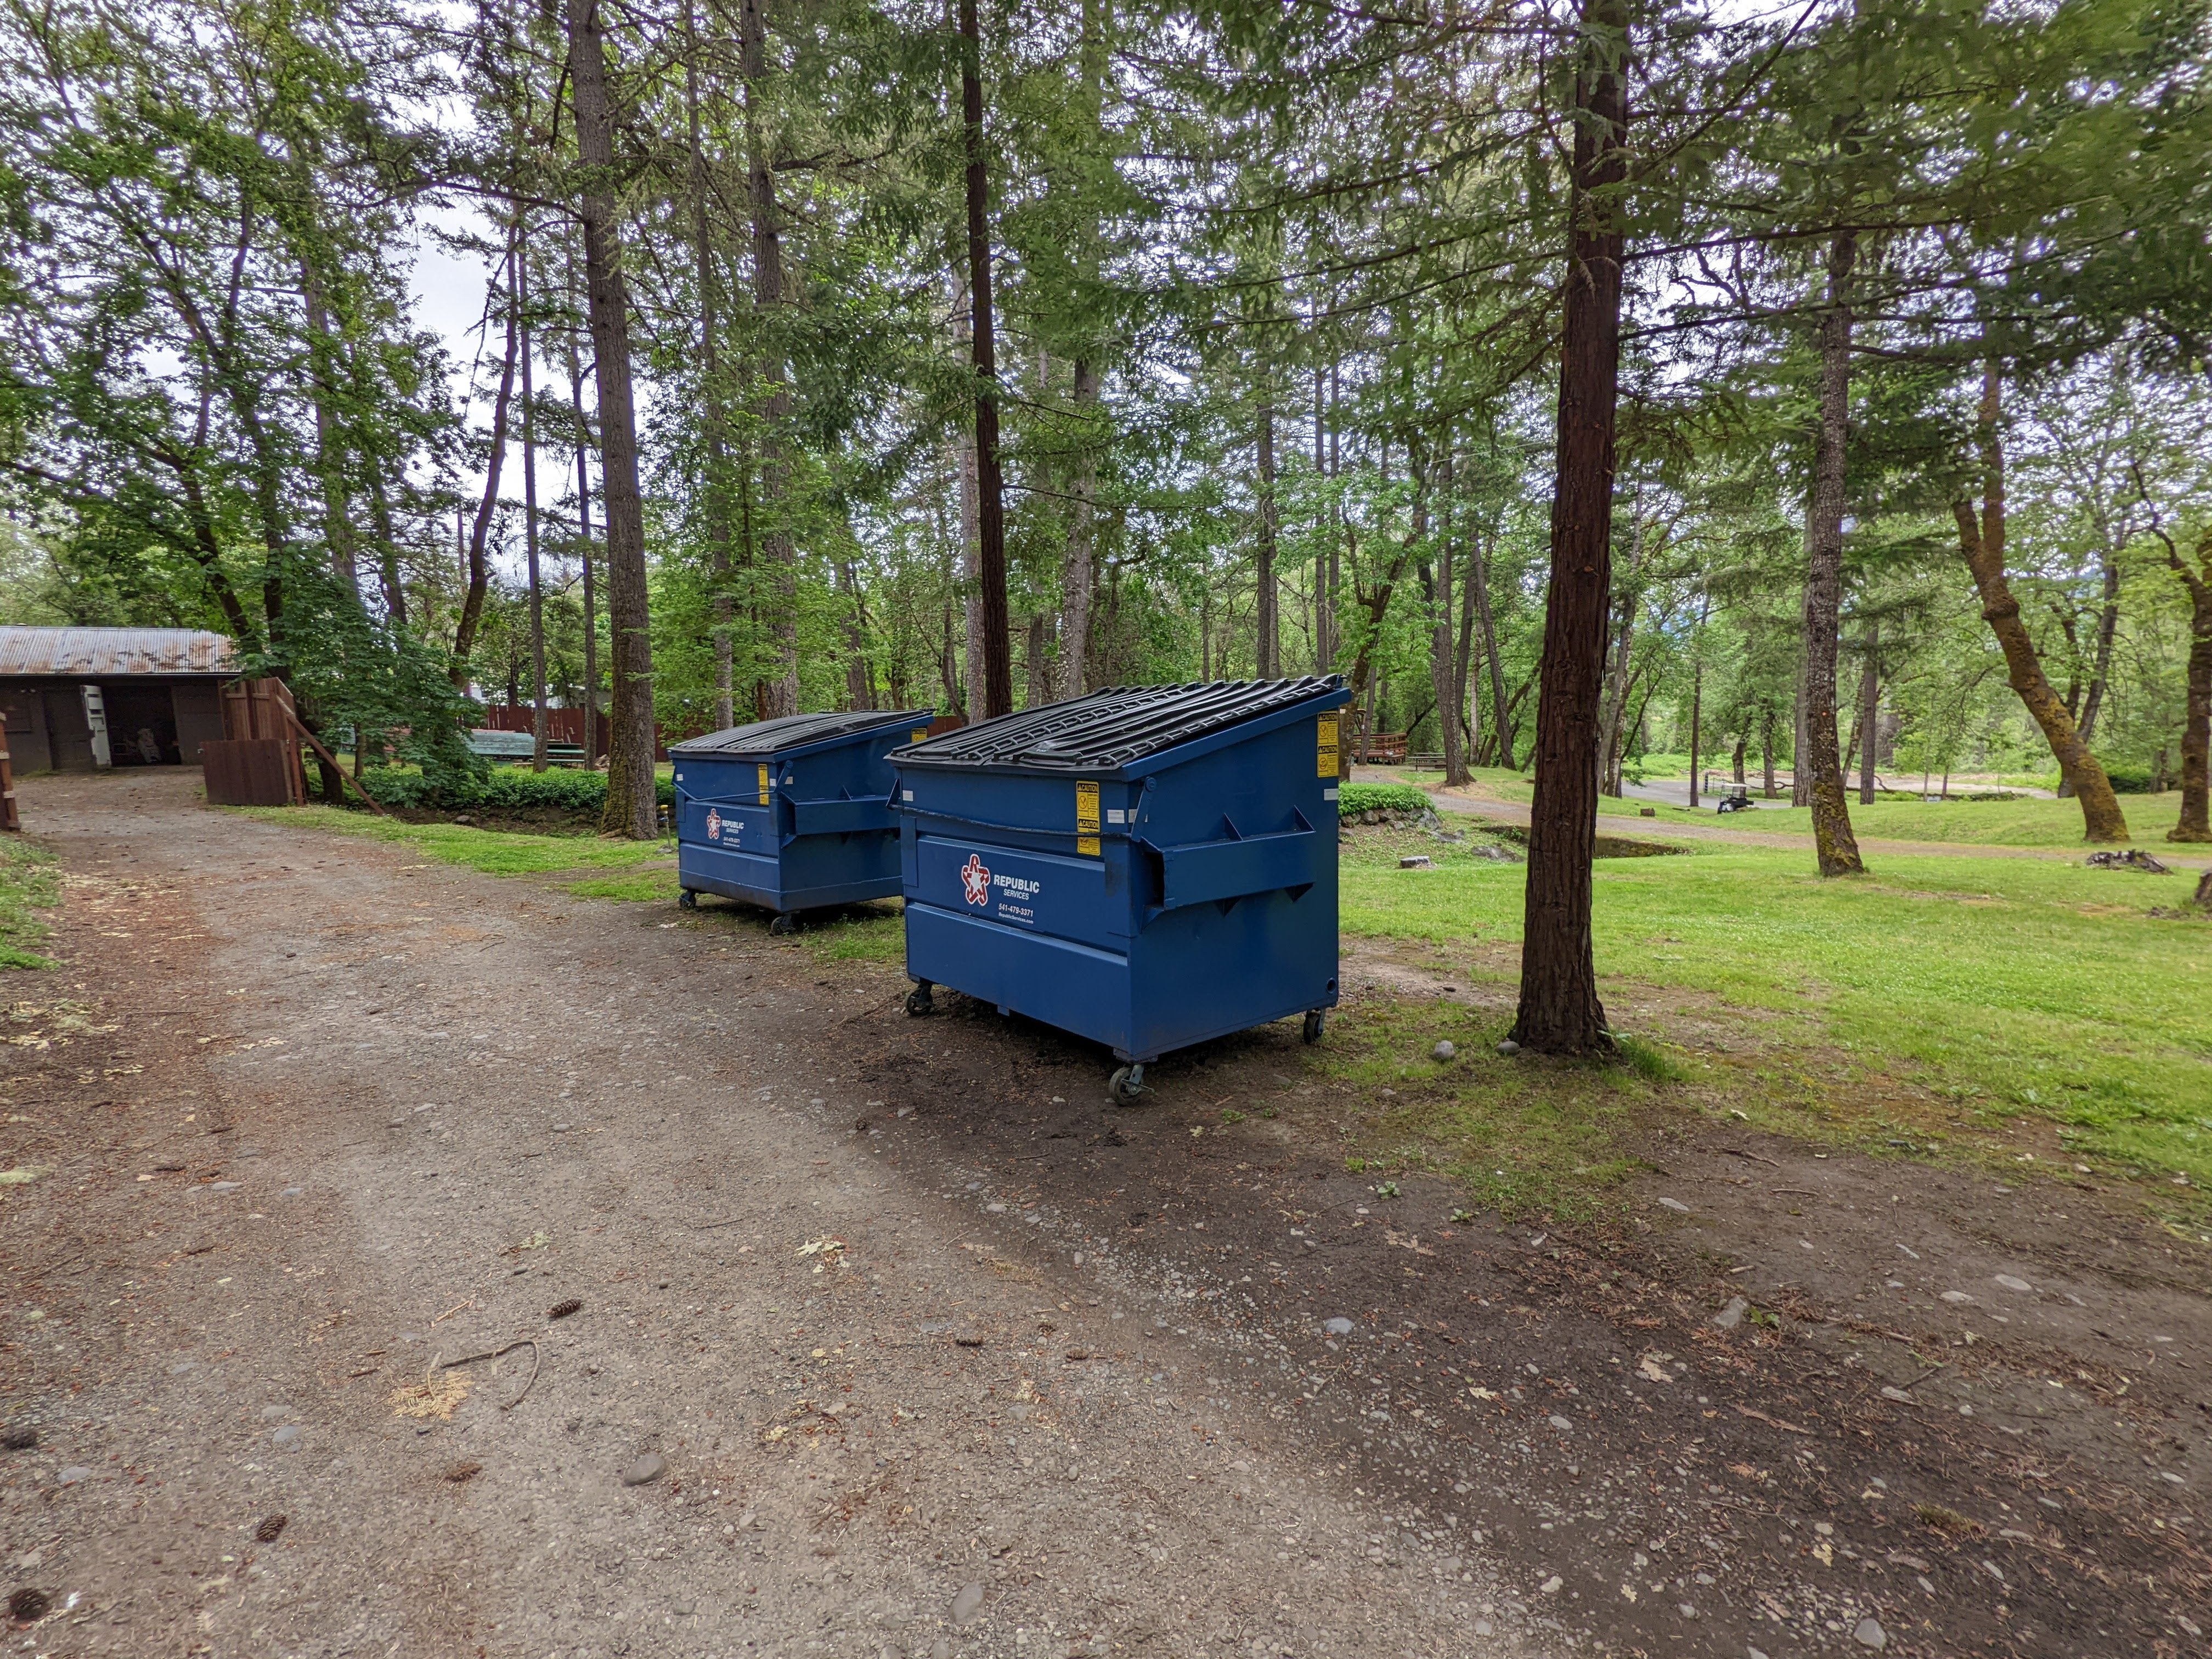 Camper submitted image from Whitehorse County Park - 4